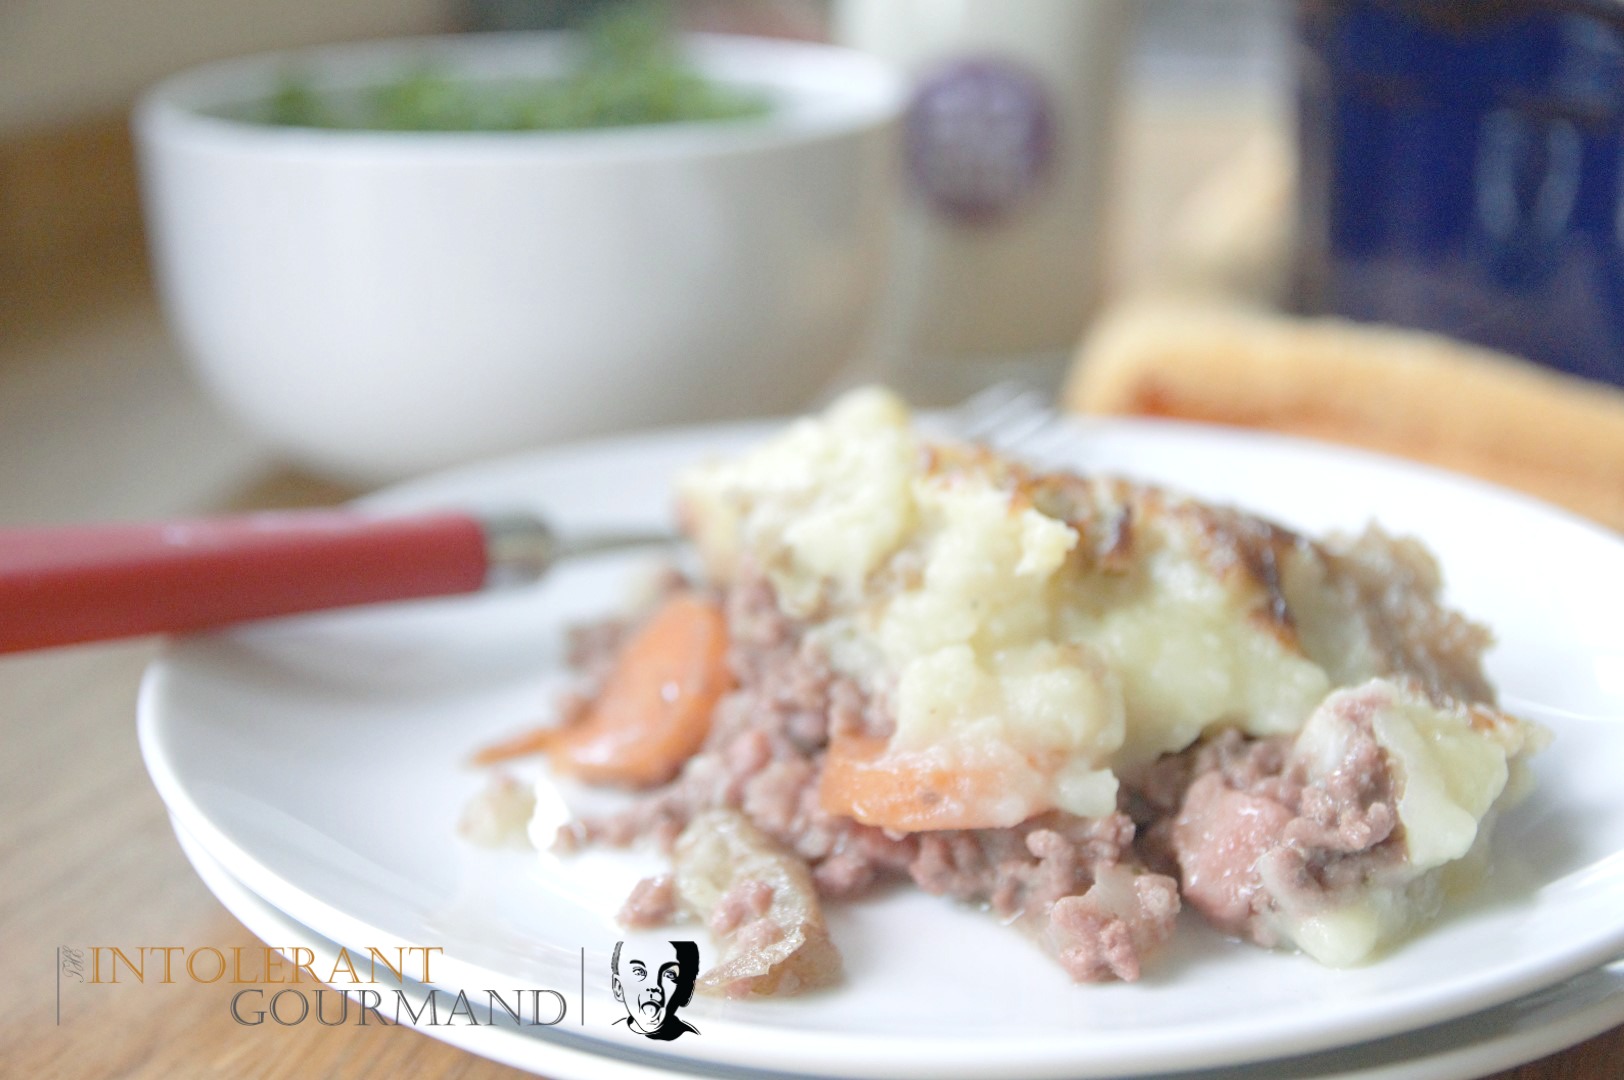 Cottage Pie - a delicious twist on the classic cottage pie, using bacon to add extra flavour! It's also gluten-free so fab for those with IBS or following a gluten-free diet due to allergies and intolerances! www.intolerantgourmand.com